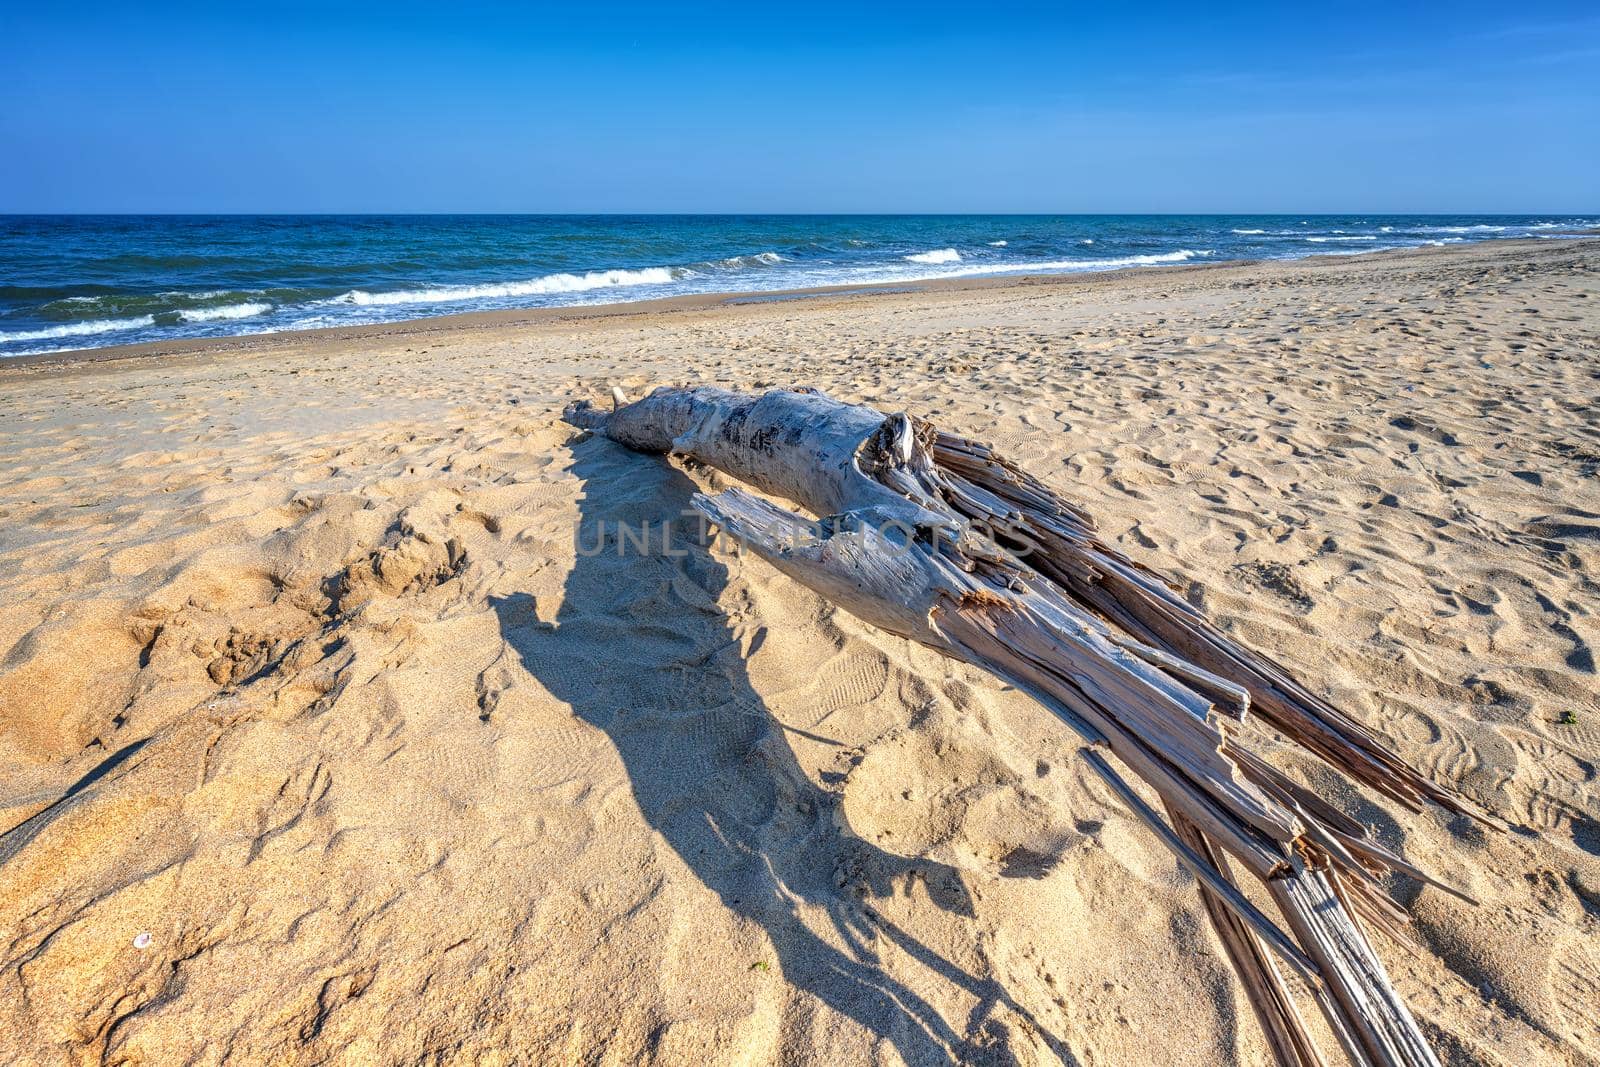 Old wood on the beach. Day view seascape.